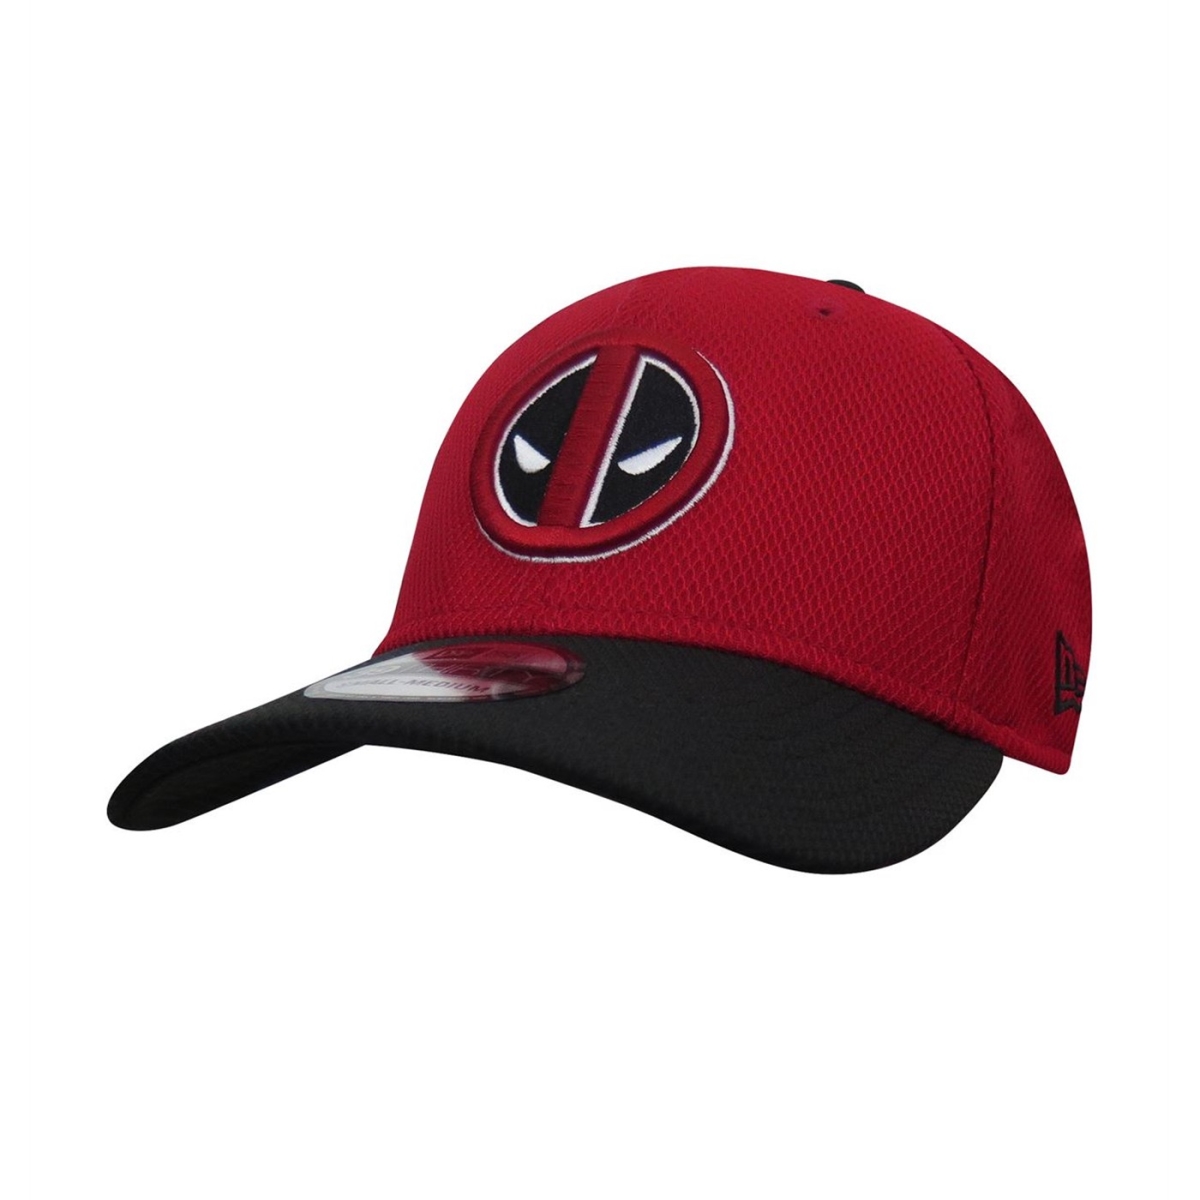 Picture of Deadpool capdprbsym39thirty-l-x-Large-XLarge Deadpool Symbol Red & Black 39 Thirty Fitted Hat - Large & Extra Large